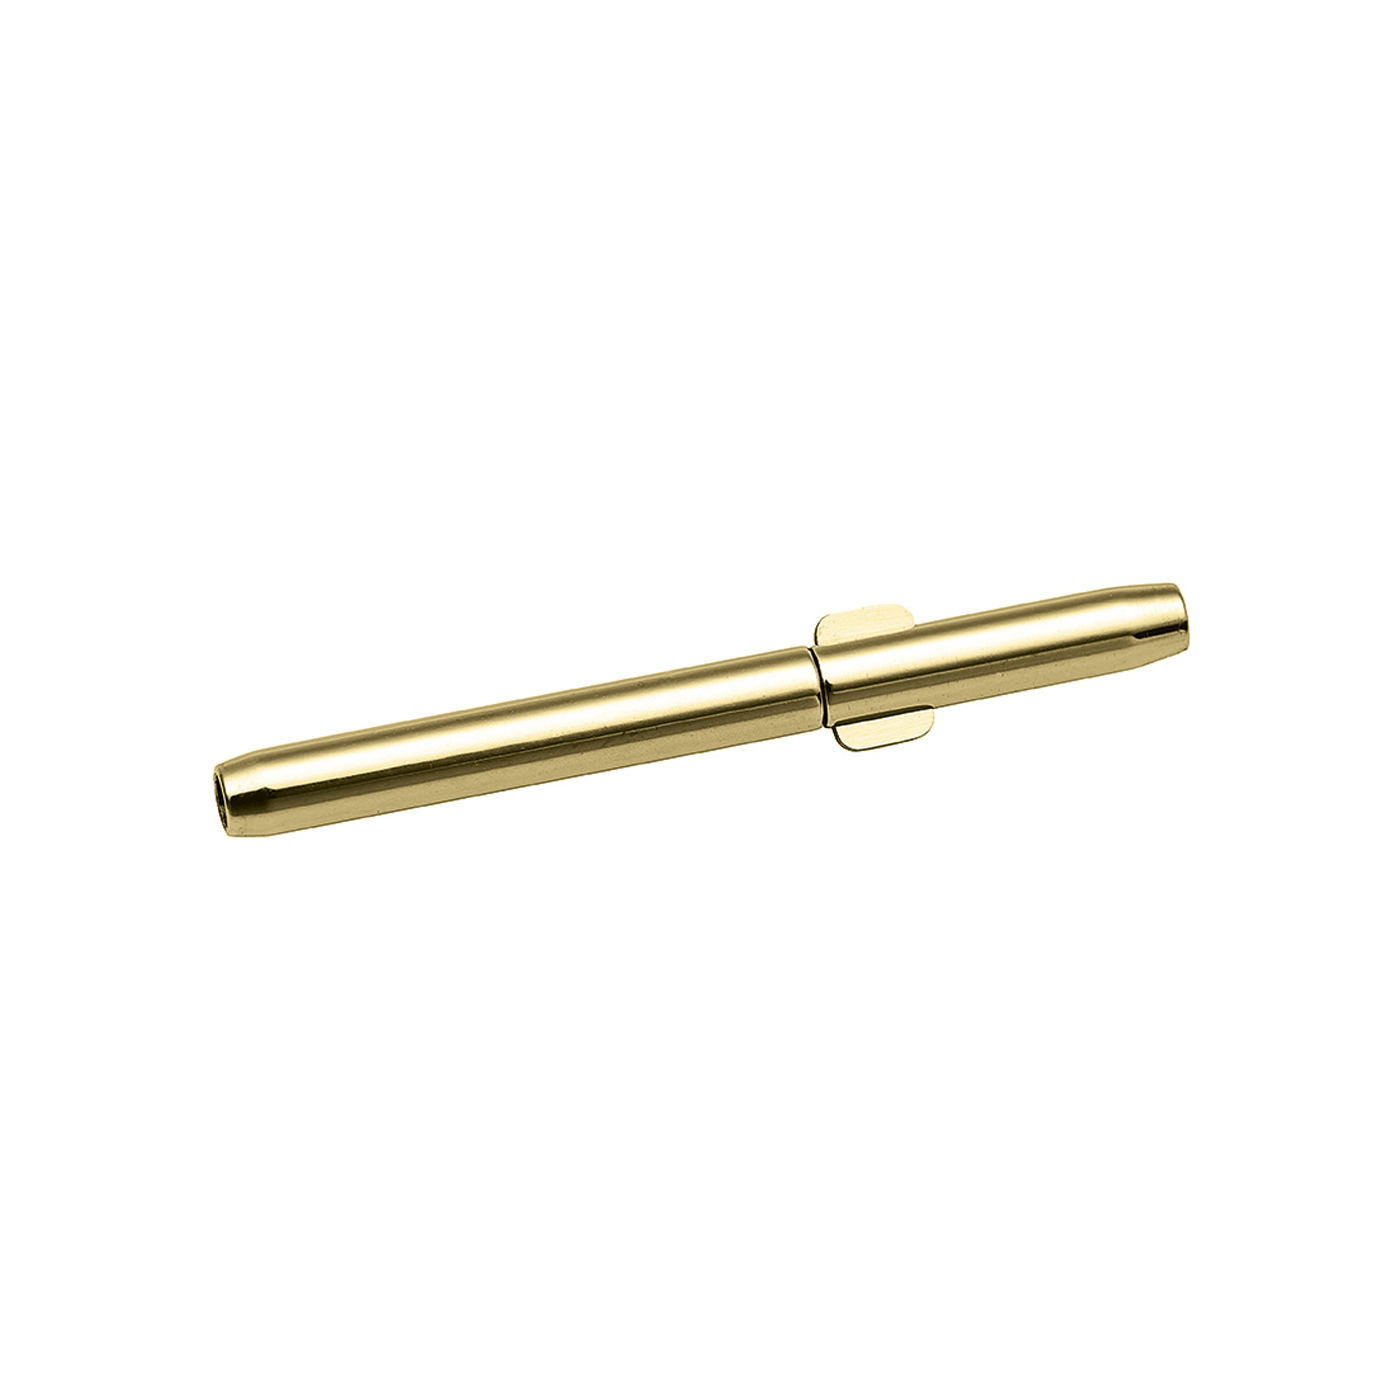 Double Clip Clasp, Stainless Steel Gold-Pl., ø 2.0 x 1.2 mm - 1 piece